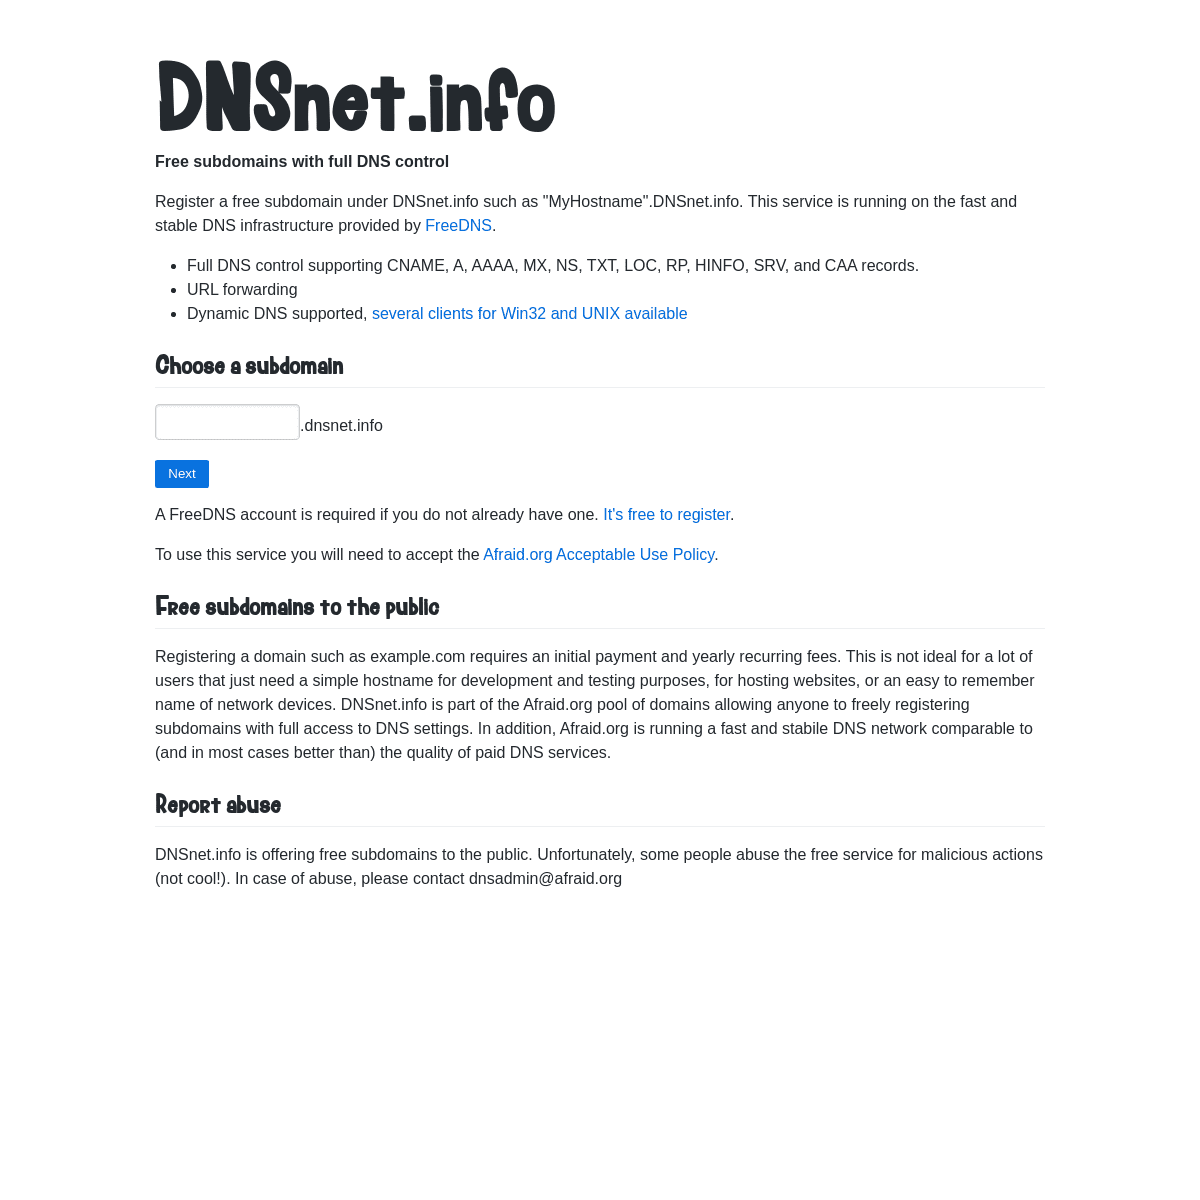 A complete backup of https://dnsnet.info